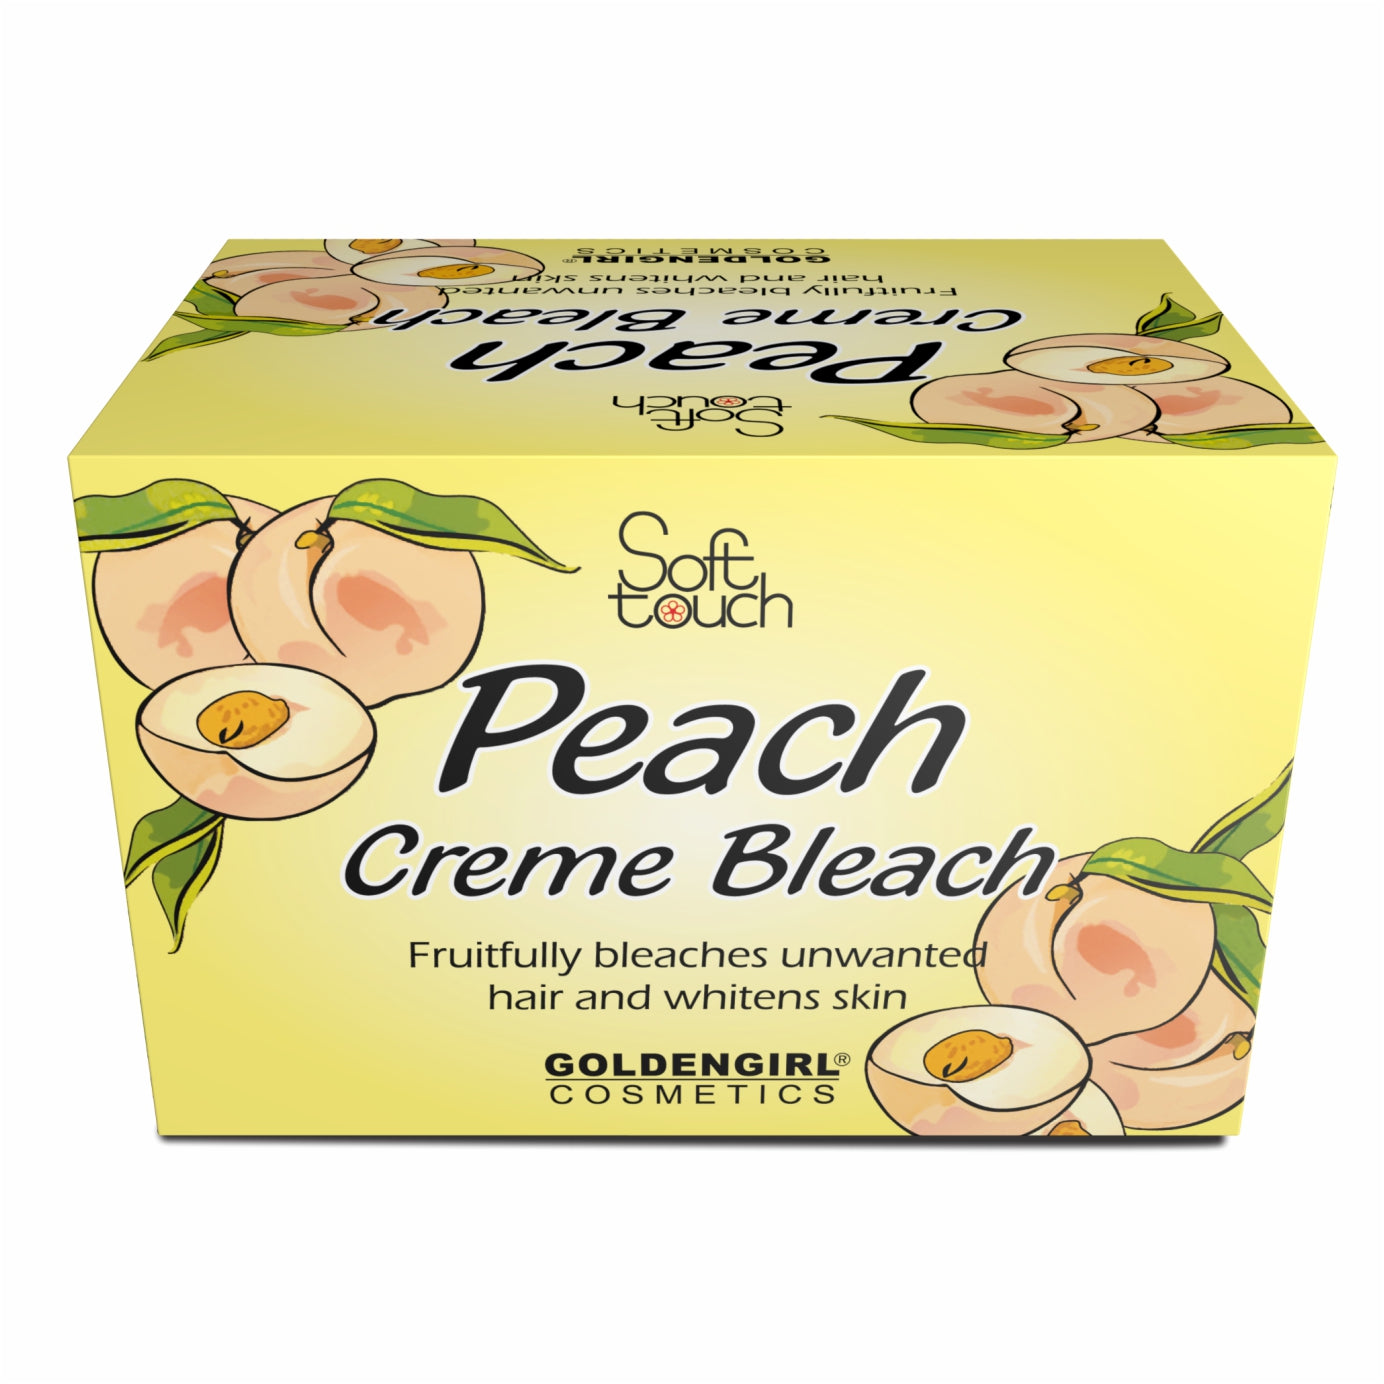 Golden Girl Peach Creme Bleach makes unwanted hair on face, arms and legs invisible in minutes. The vitamin C rich peach is known worldwide as the "Queen of fruit" because of its distinctive flavor and delicate fragrance. It is nature's richest source of antioxidant, vitamin A and phytochemicals that are important to healthy skin. Peach Creme Bleach effectively bleaches excess dark hair while the phytochemicals whiten your skin.